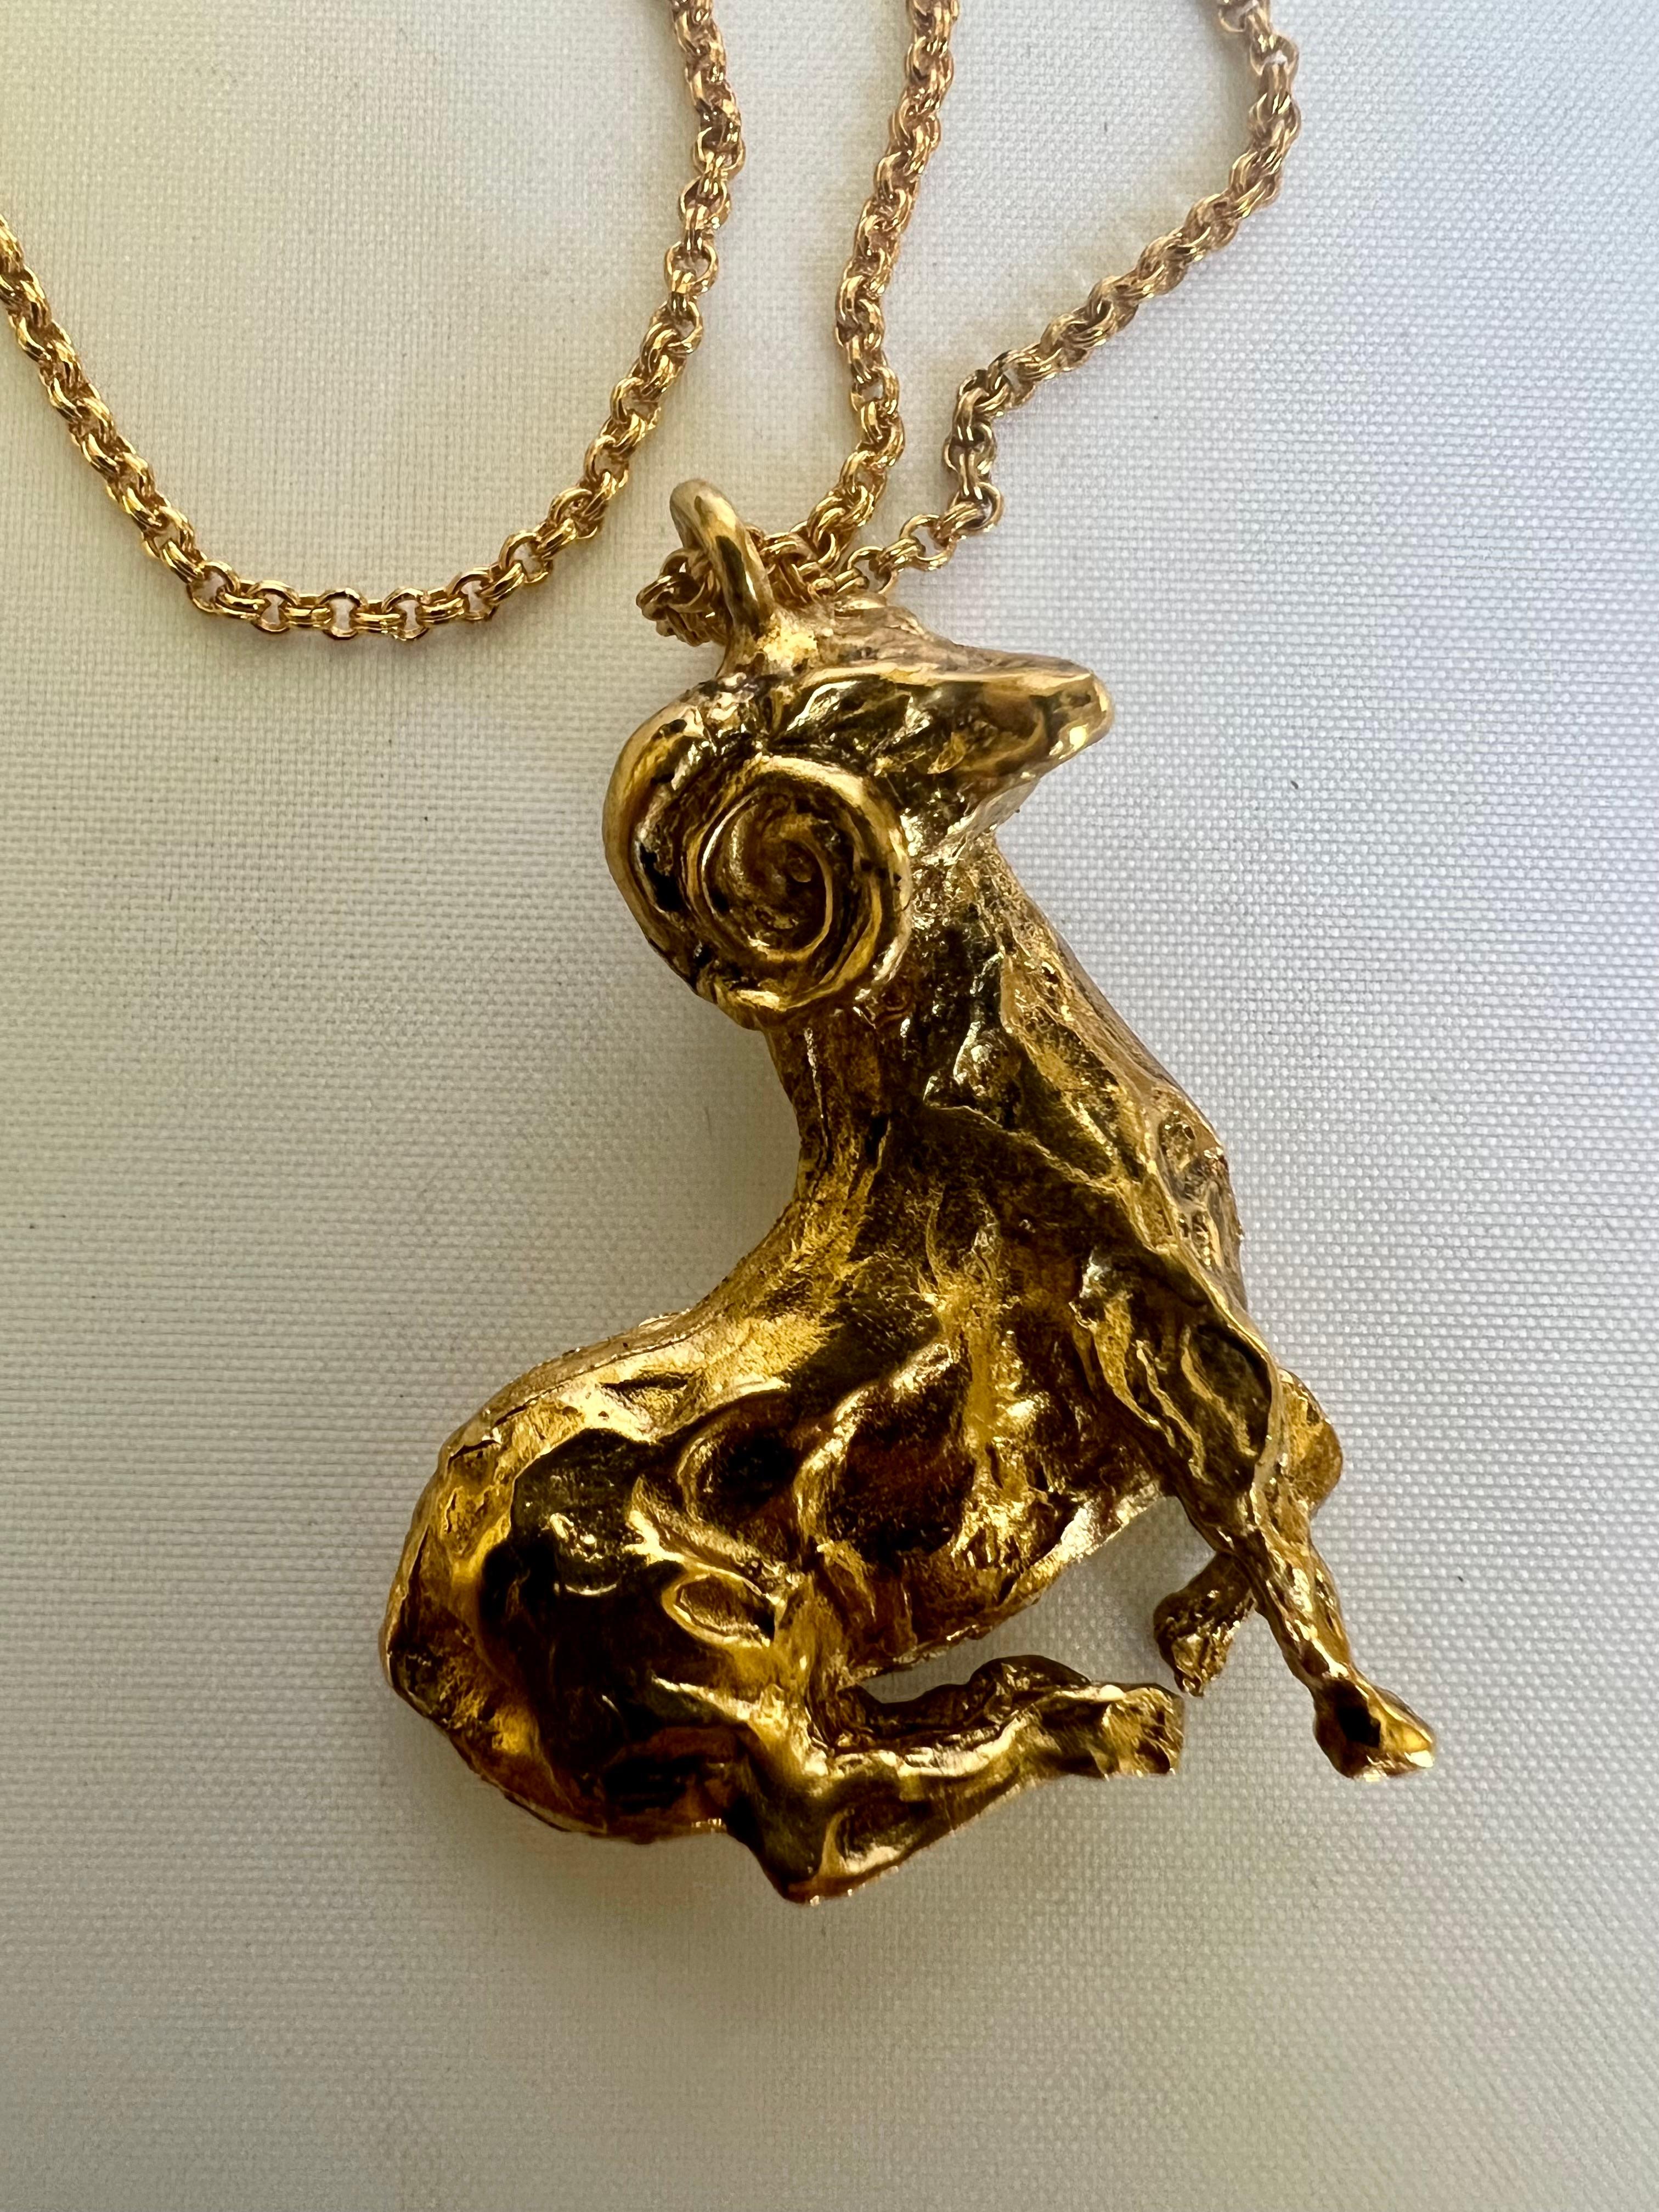 Unique unisex artisan gilded bronze (18k gold plated) chain Capricorn pendant necklace made in France. 

The chain measures 20 inches long, and the pendant measures 1.50 inches by 1.25 inches.